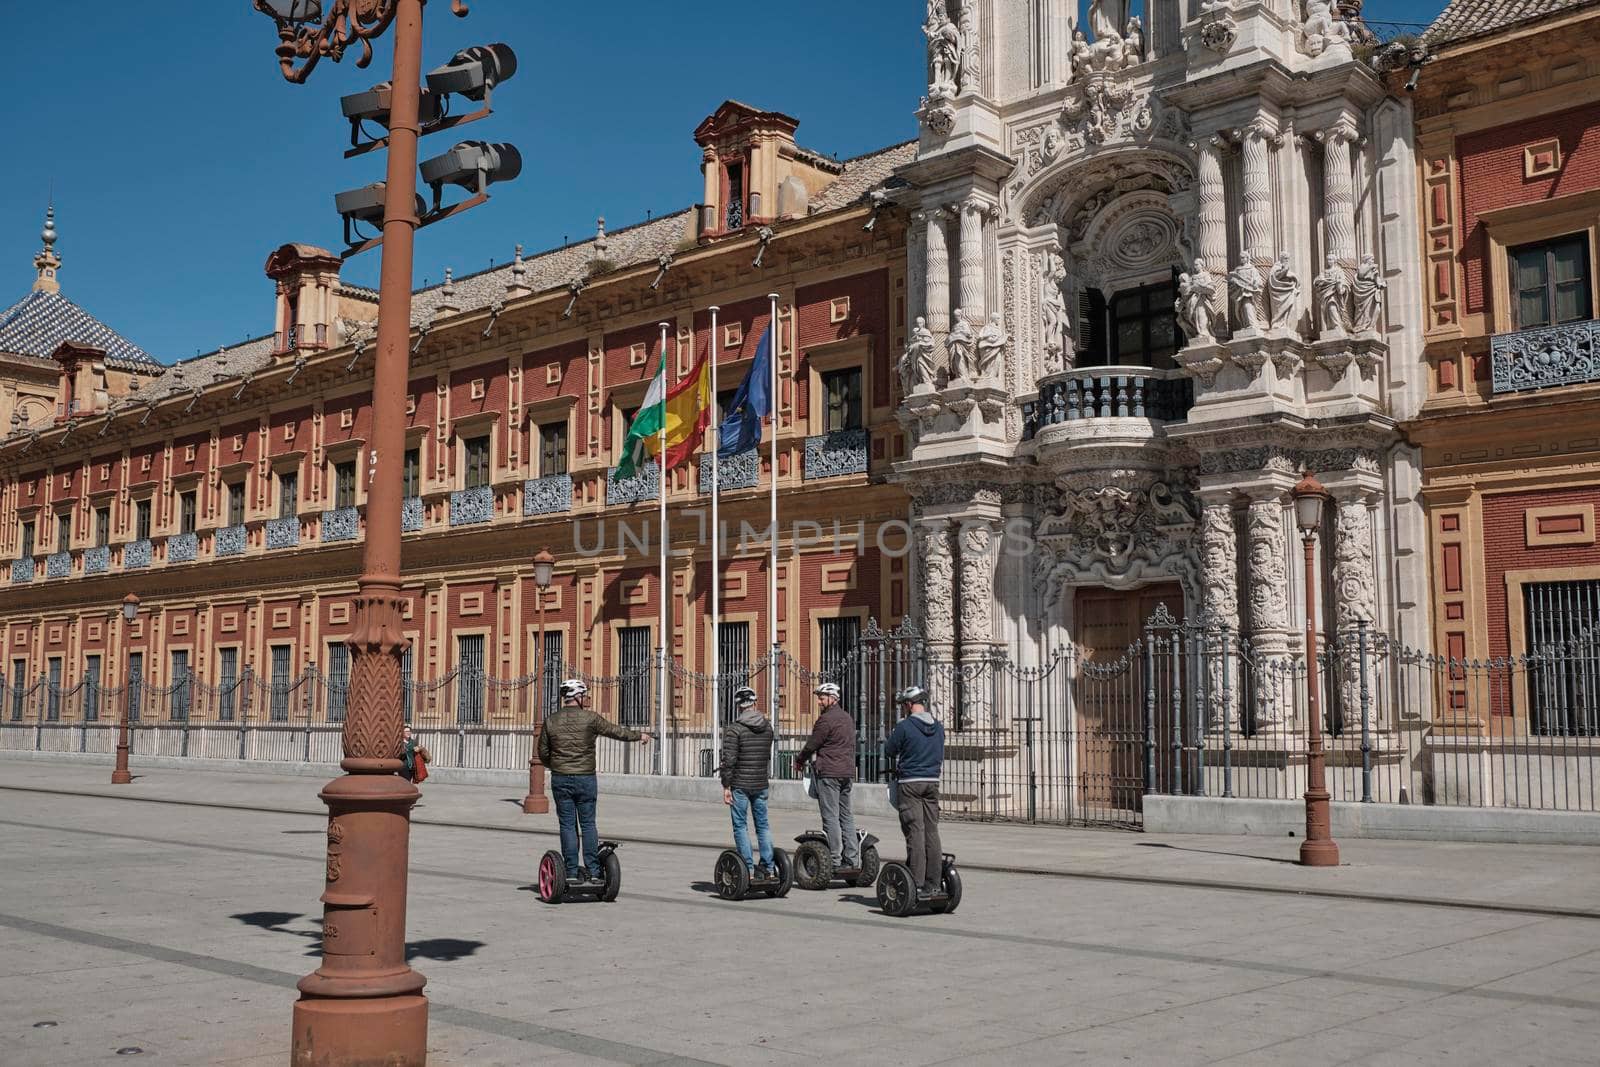 April 2019 - peoples on scooter electric skateboard intelligent hoverboard alternative way if visiting the city and view of San Telmo Palace, Seville, Spain. Seat of the presidency in a sunny day. by Sandronize